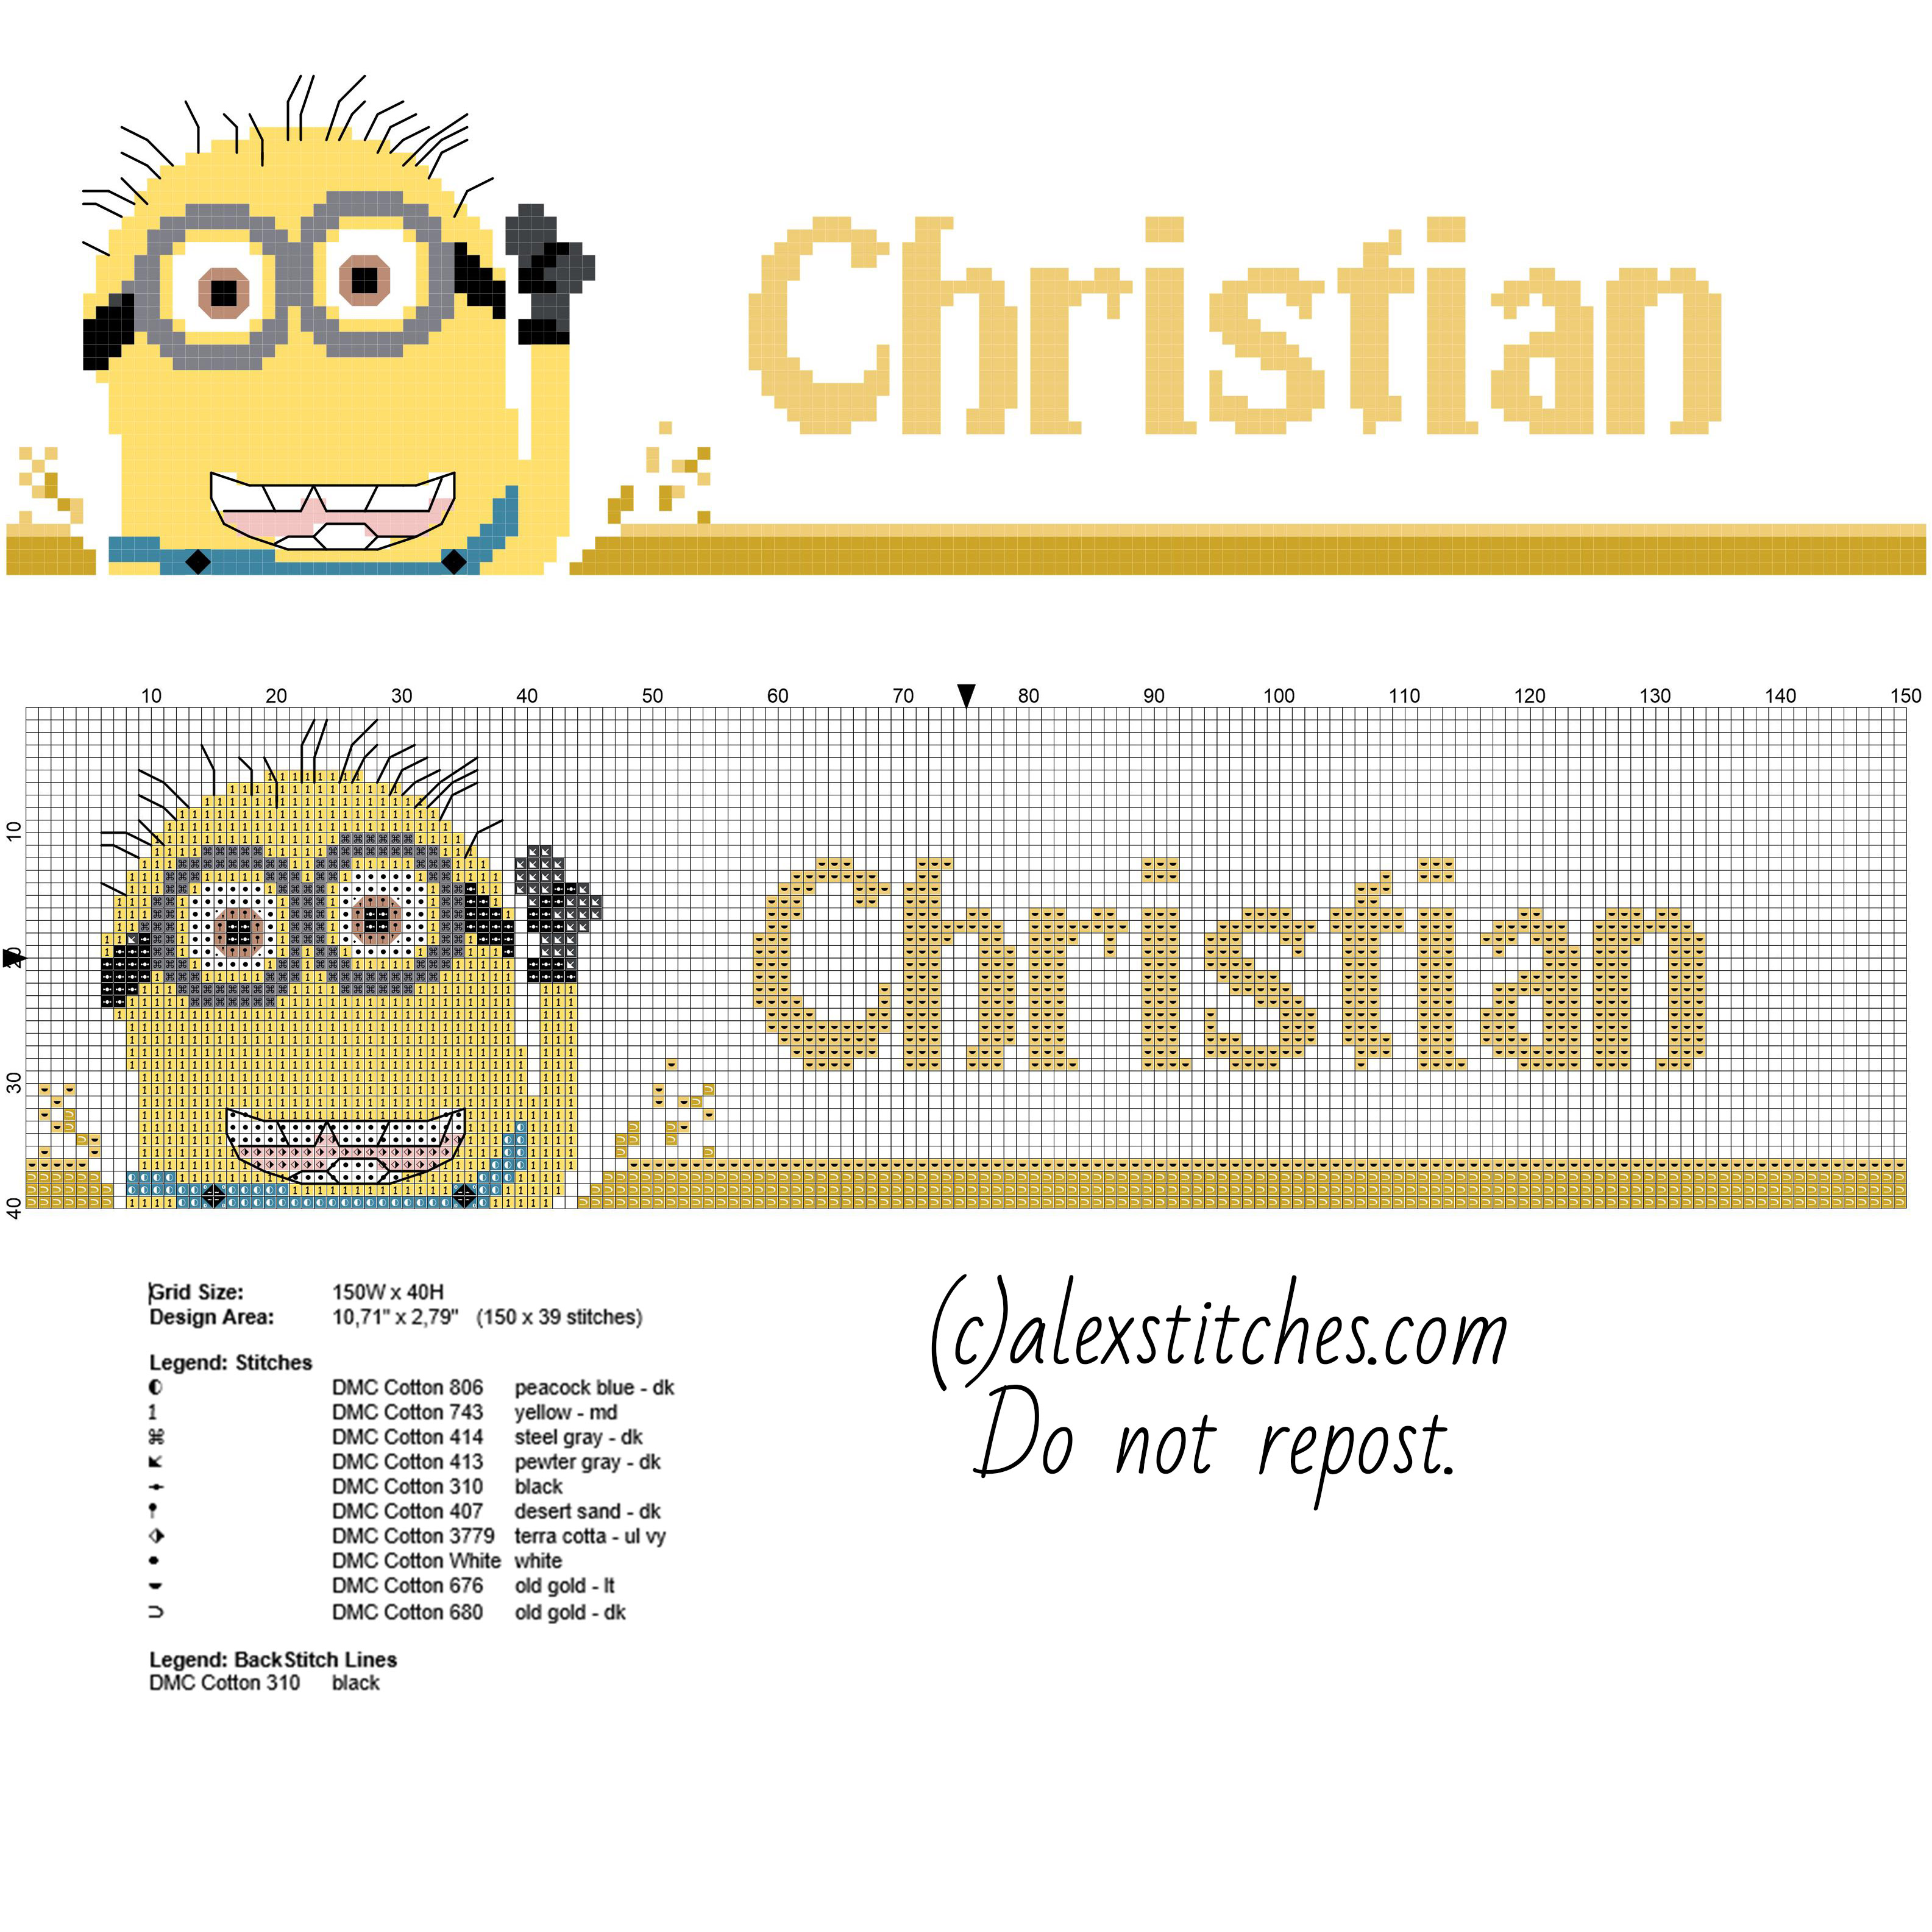 Male name Christian with Minion character from Despicable Me cross stitch patterns